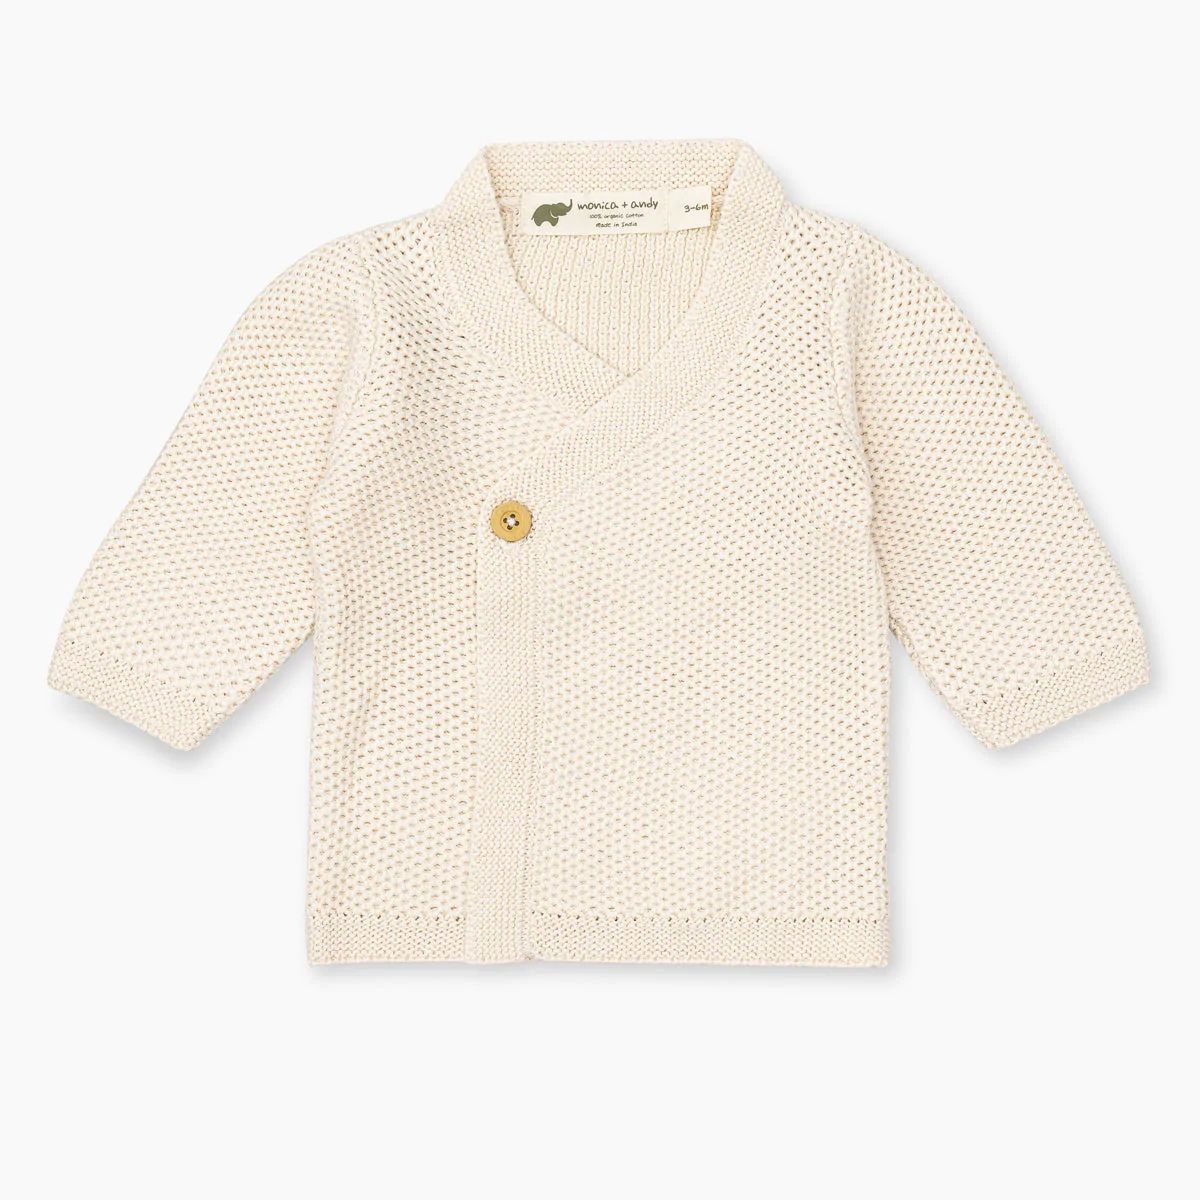 Lucky Baby Cardigan | Monica + Andy